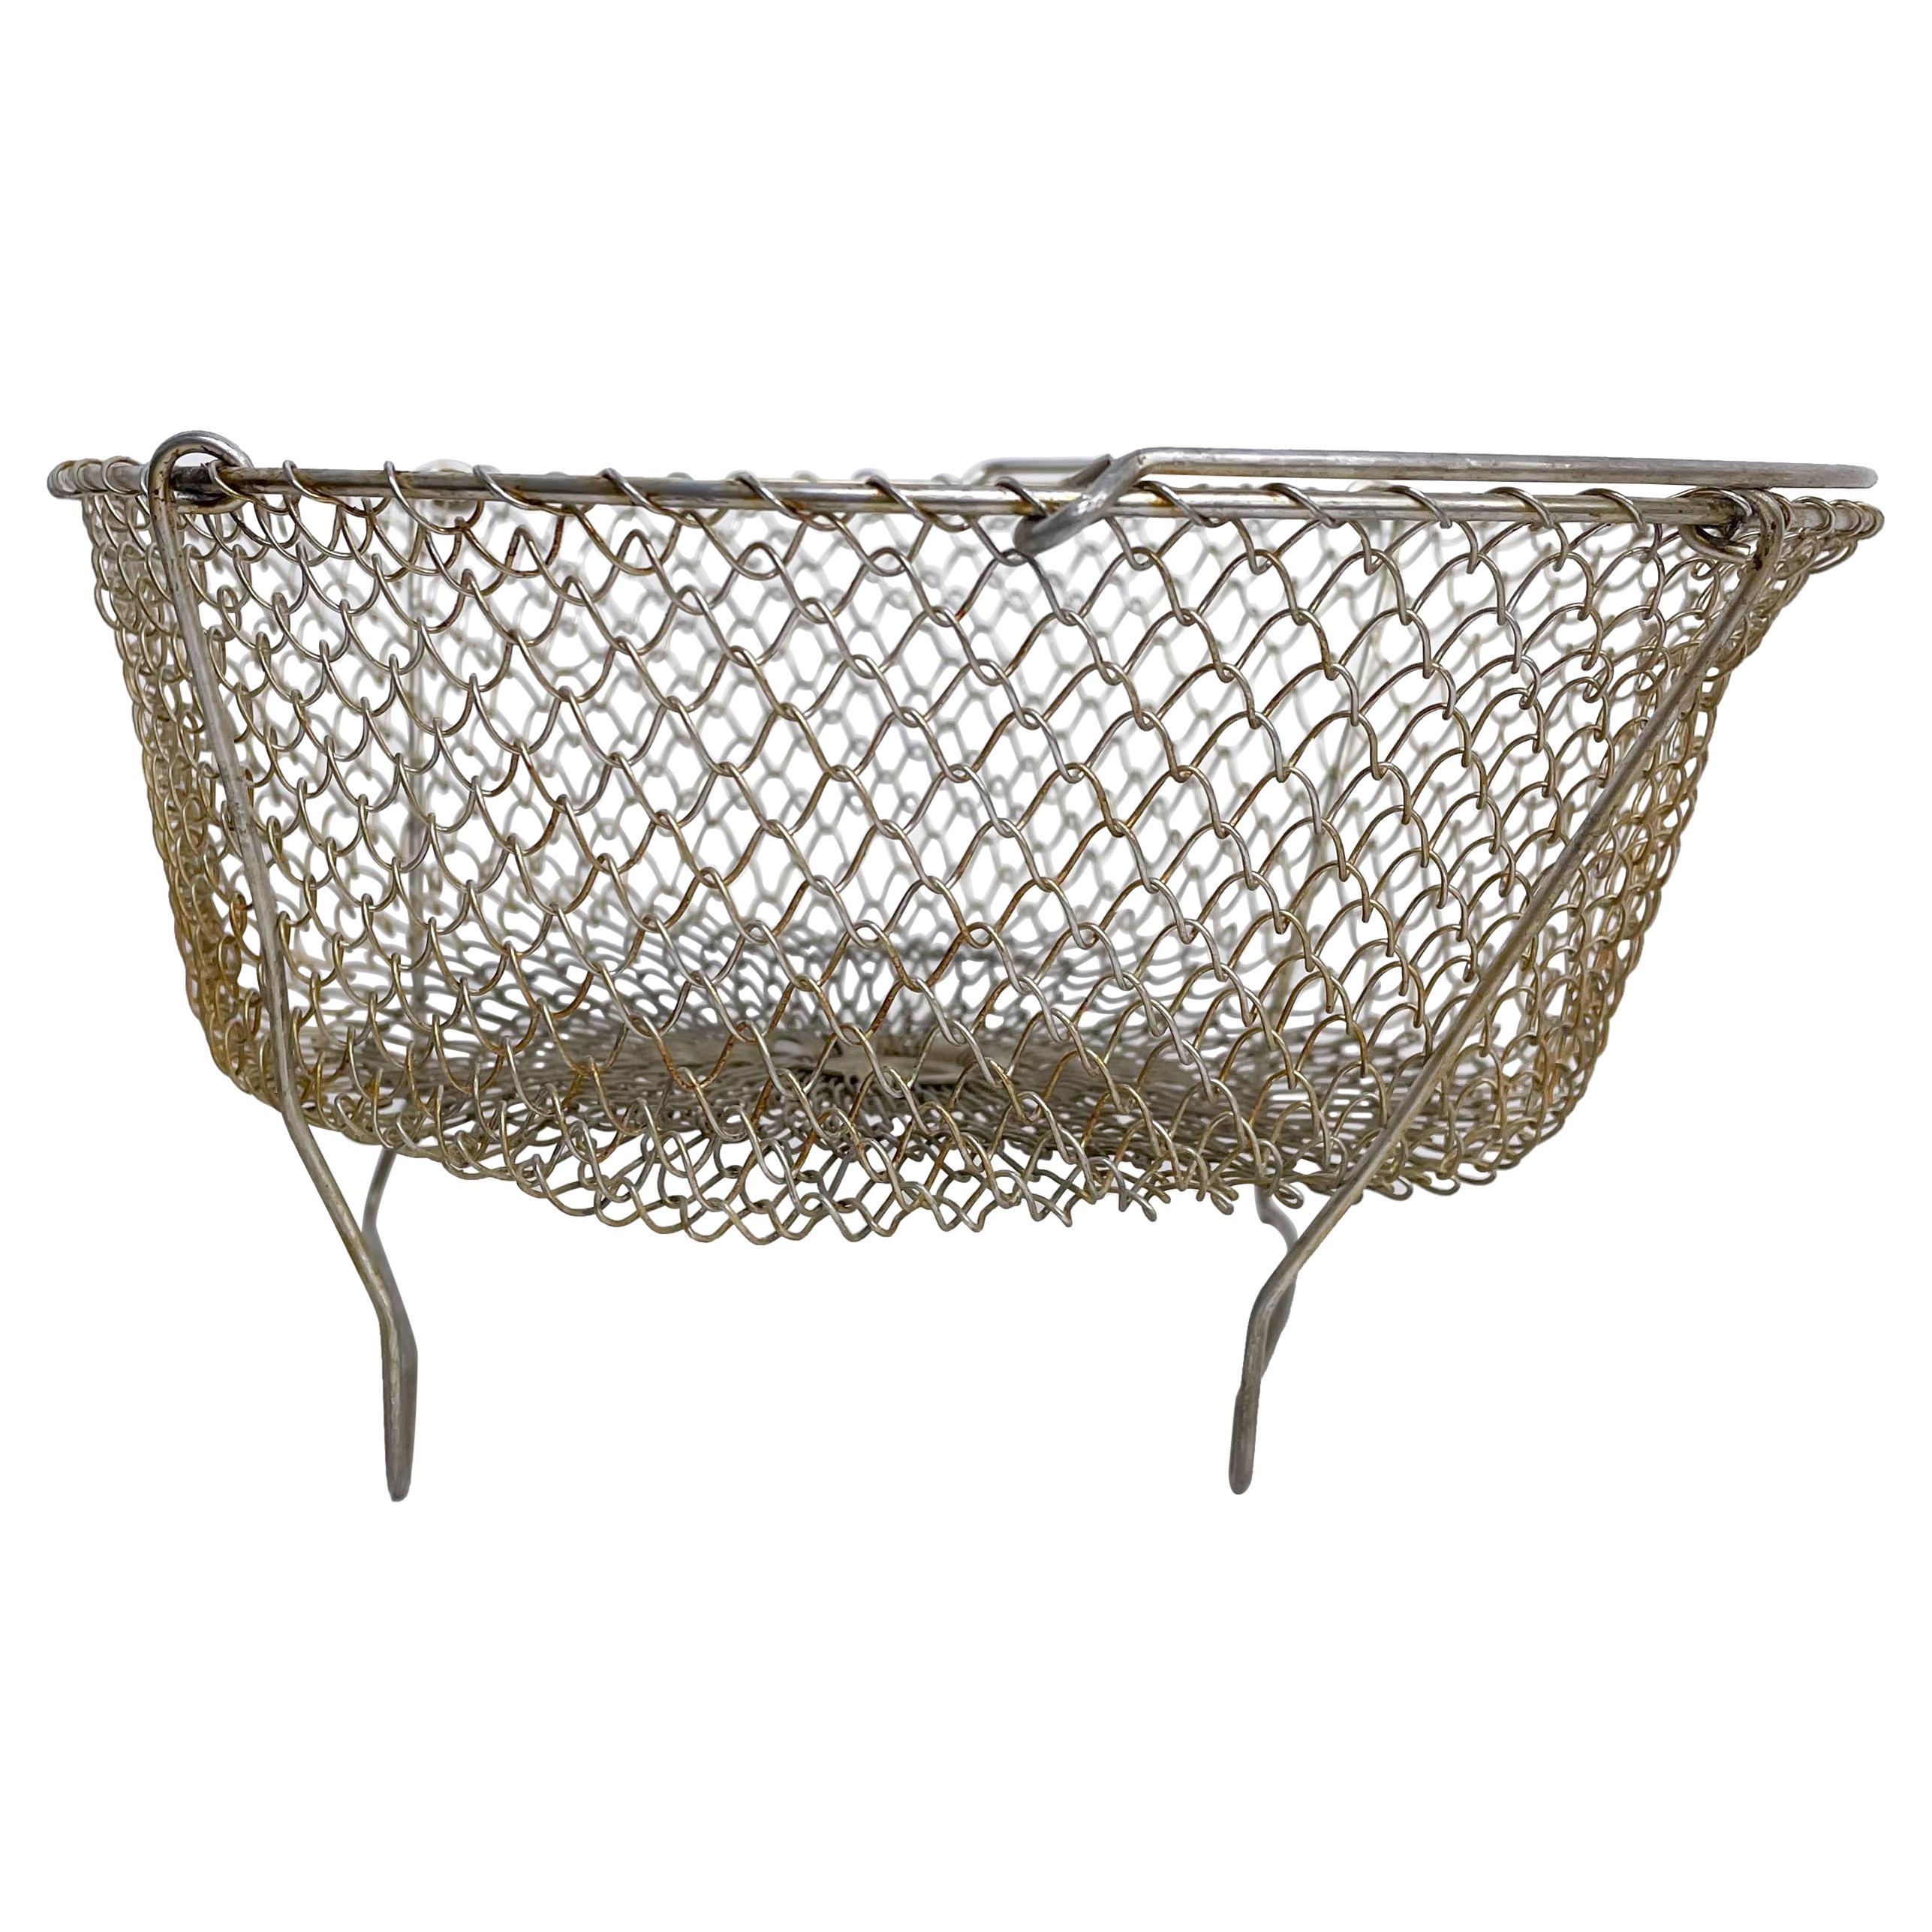 French Farm House Wire Mesh Egg Basket Stand Carry All Midcentury Modern France